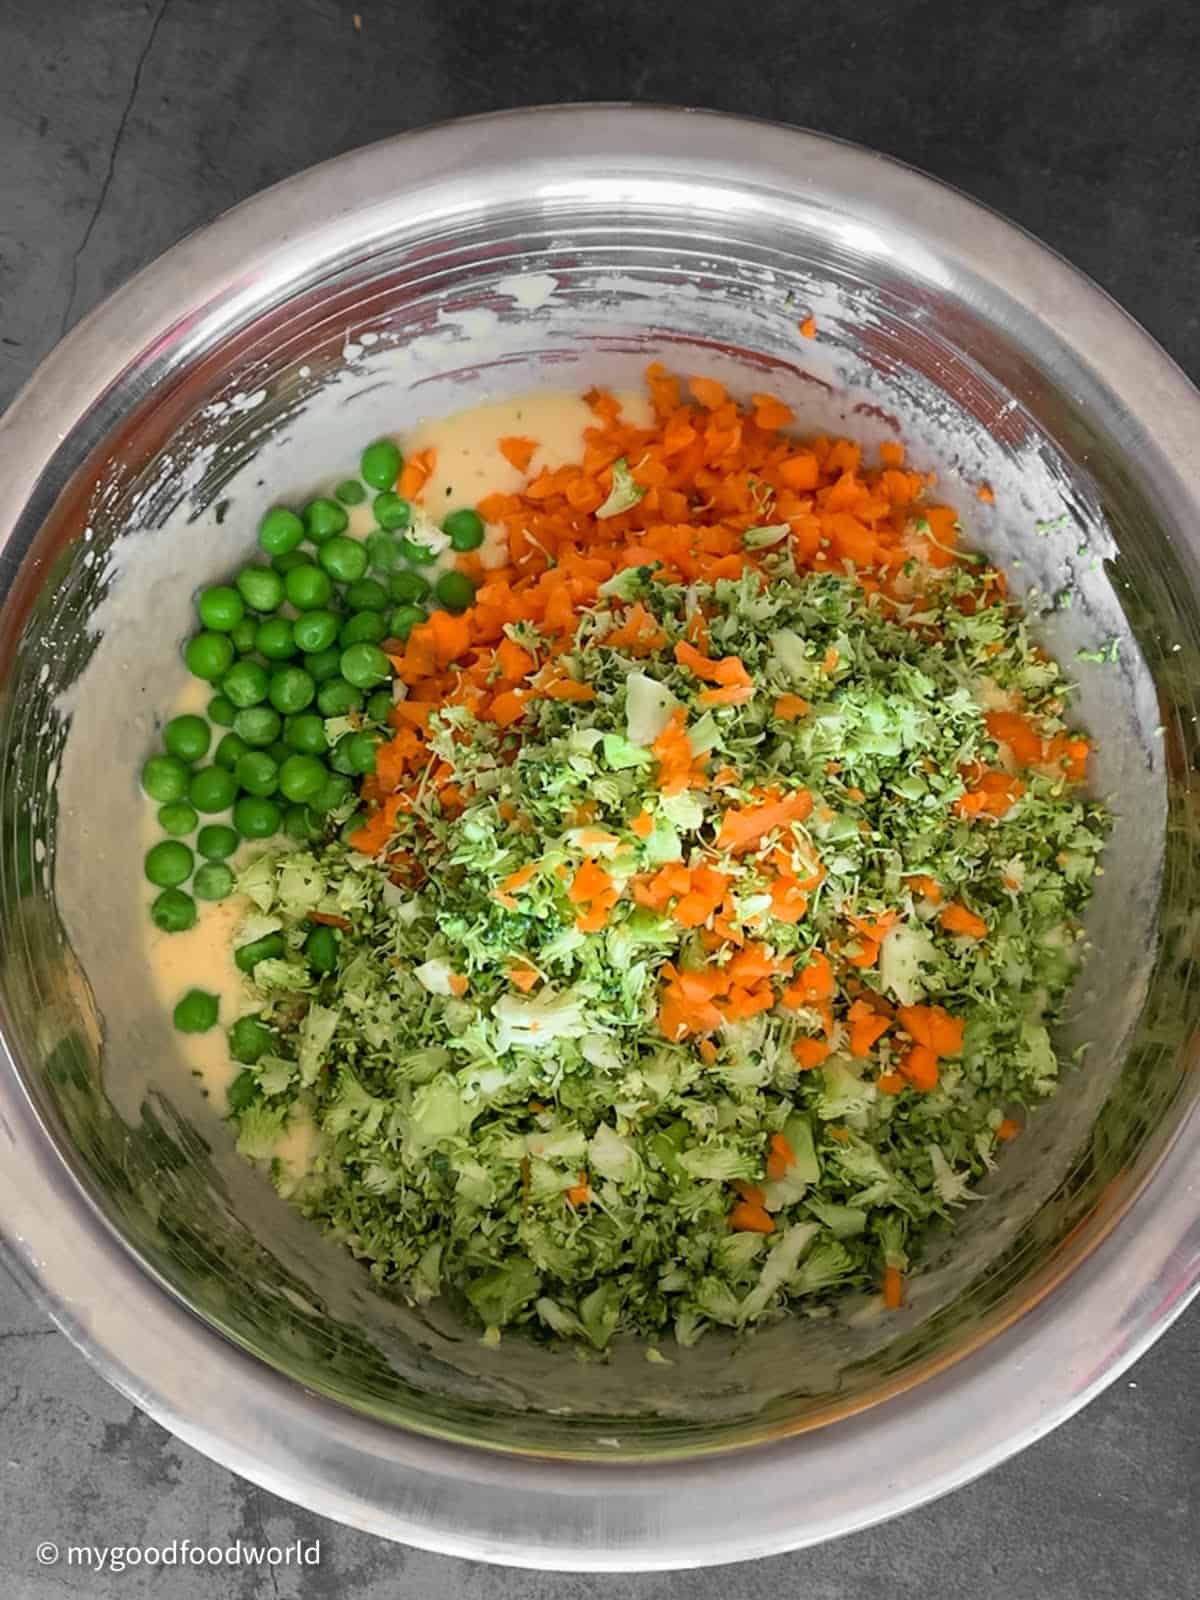 Finely chopped vegetables and peas are added to batter in a deep stainless steel bowl.